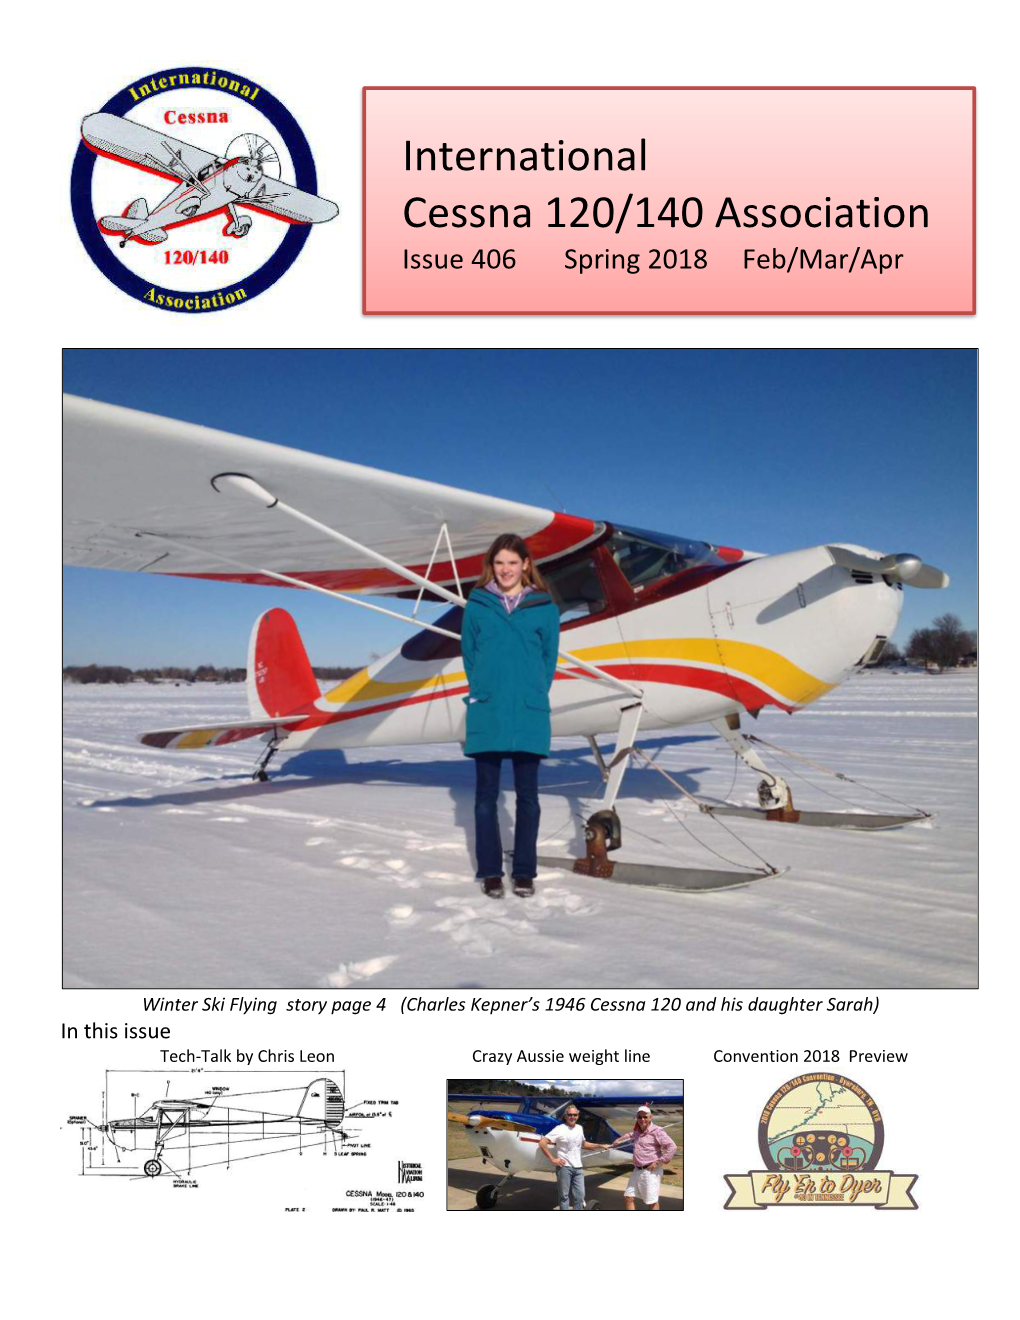 Winter Flying on Skis - (Cover Story) Page 4 Tech Talk (Empty Weight Crazy Line) - by Chris Leon Page 18 2018 Convention Preview Page 24 Upcoming Events Page 26